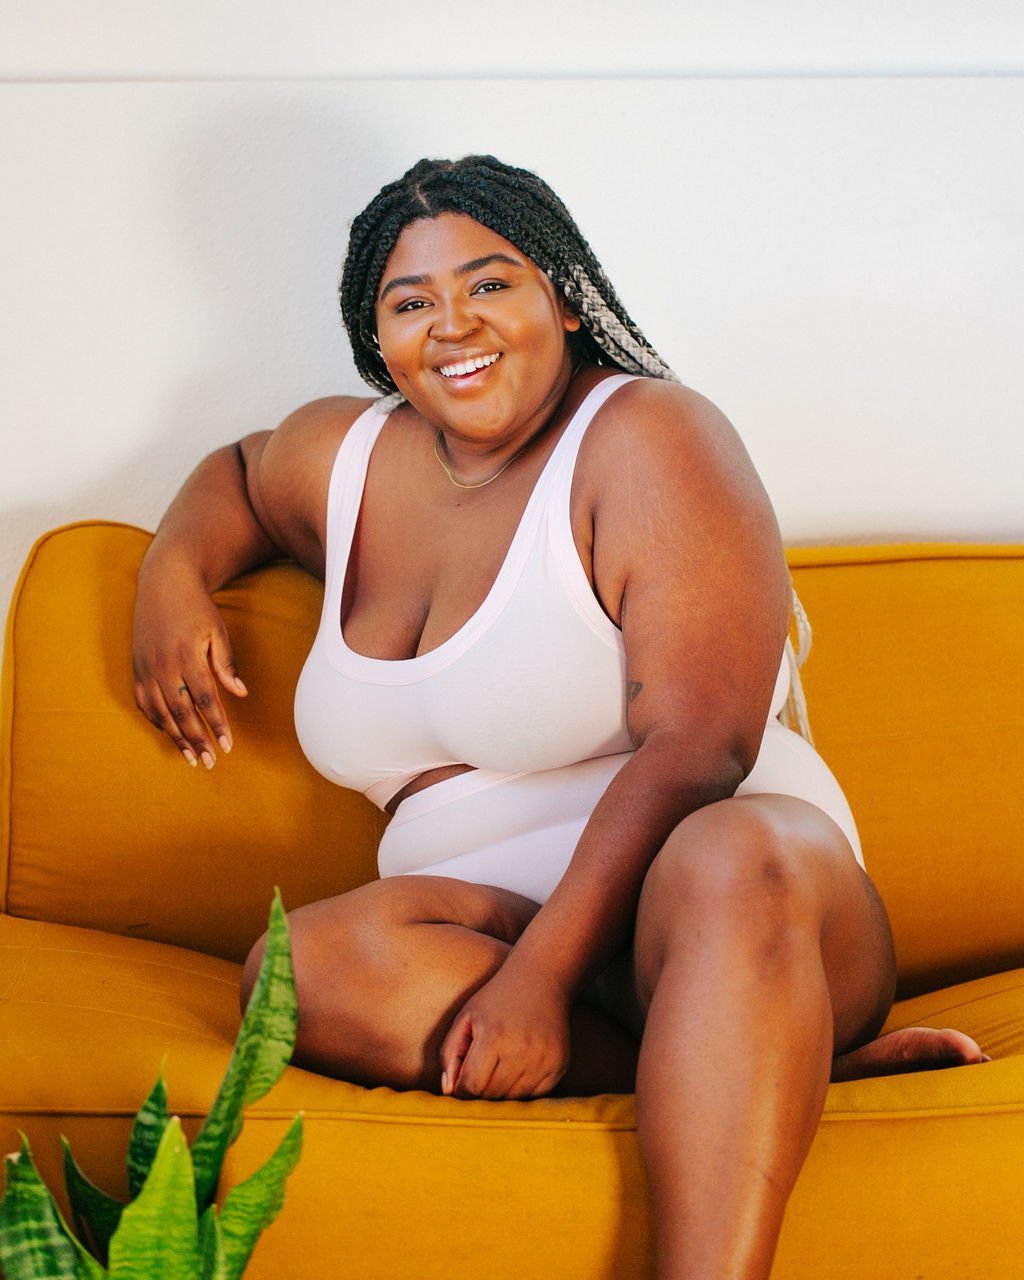 Happy and beautiful plus-sized model wearing Thunderpants organic cotton Bralette and Women's Original style underwear in plain pink sitting on a bright yellow couch.